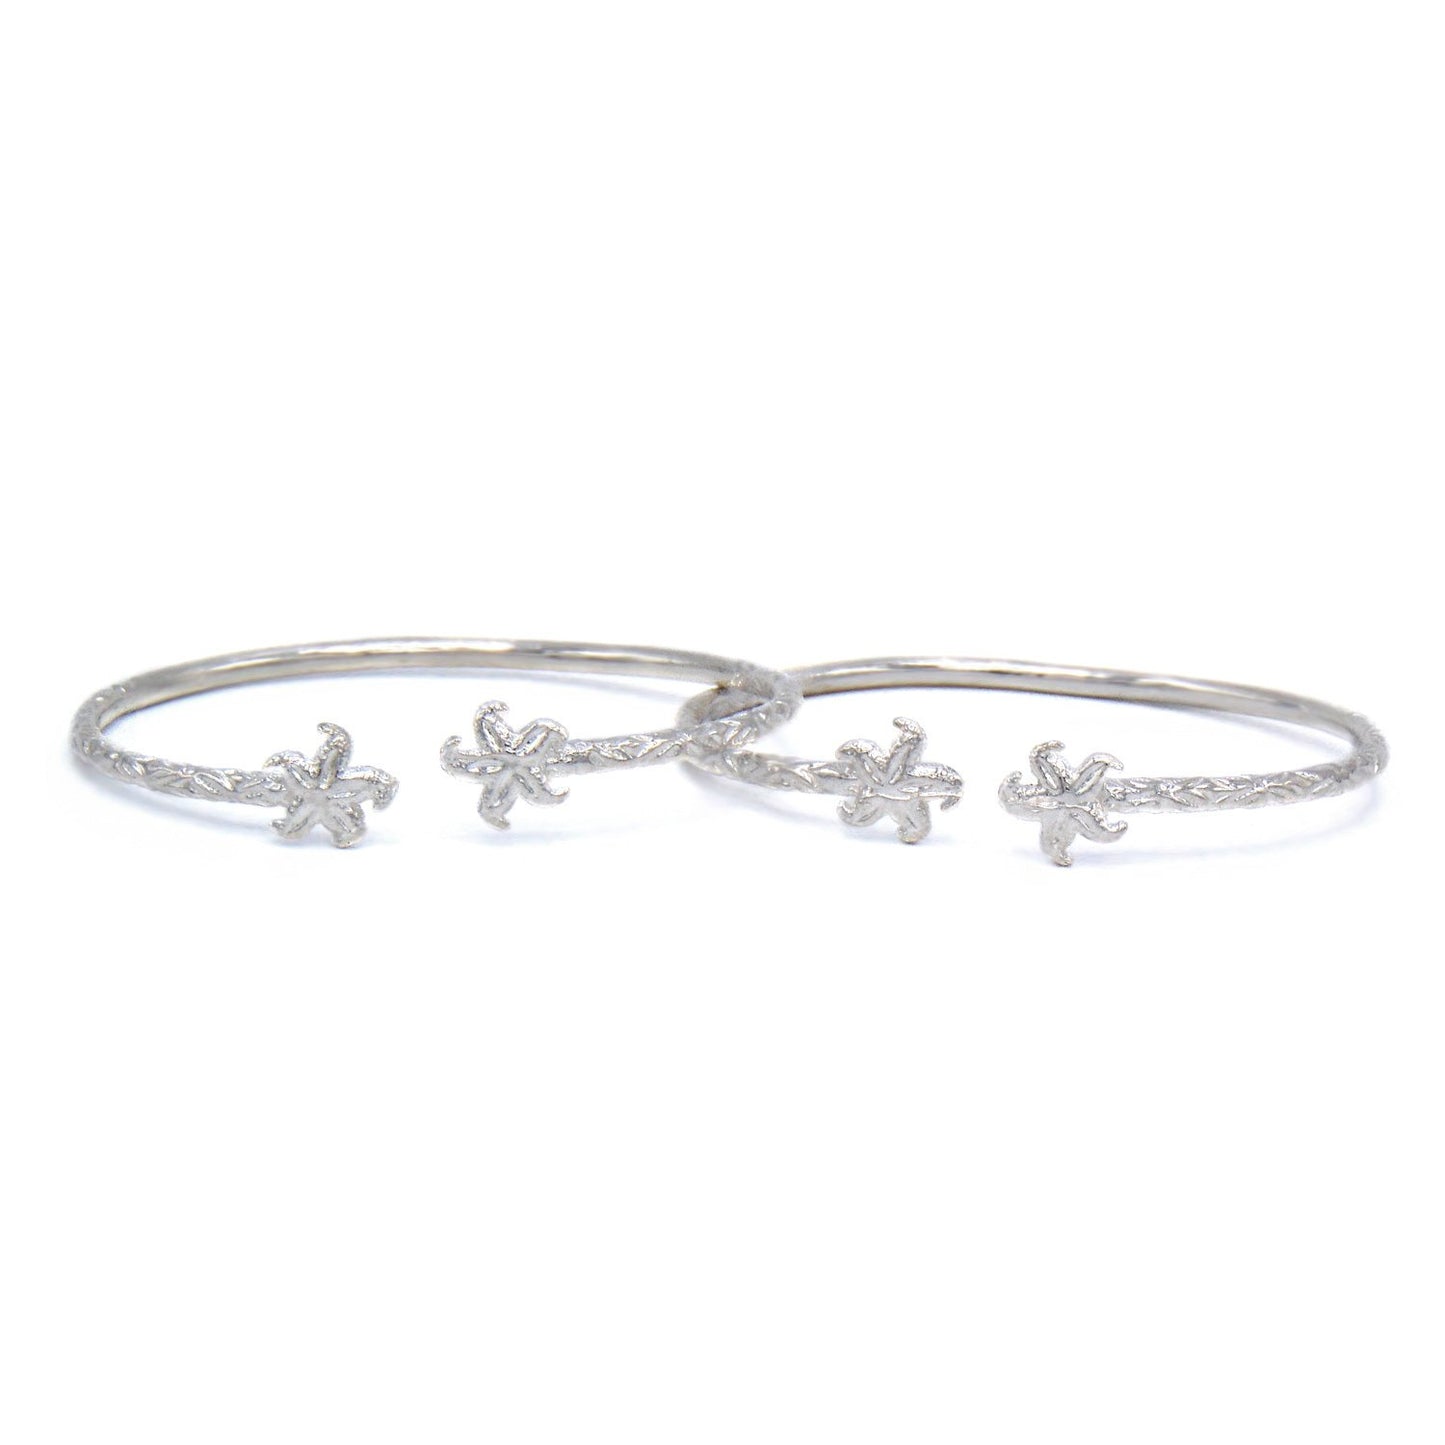 Small Starfish Solid .925 Sterling Silver West Indian Bangles (Pair) - Betterjewelry